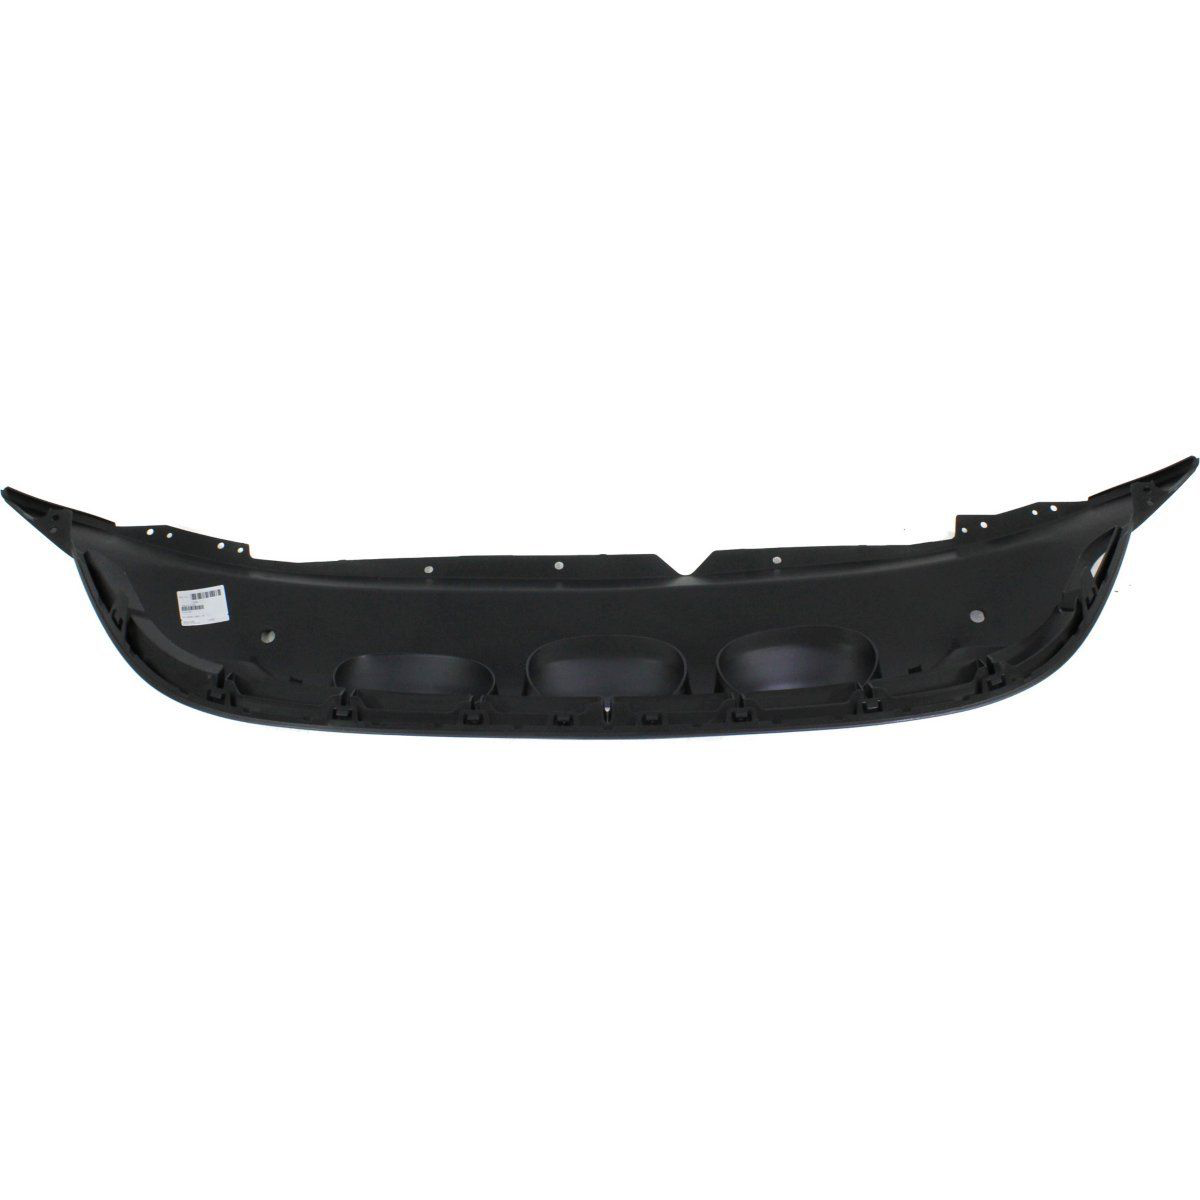 2011-2012 NISSAN JUKE FRONT BUMPER Lower VALANCE Painted to Match